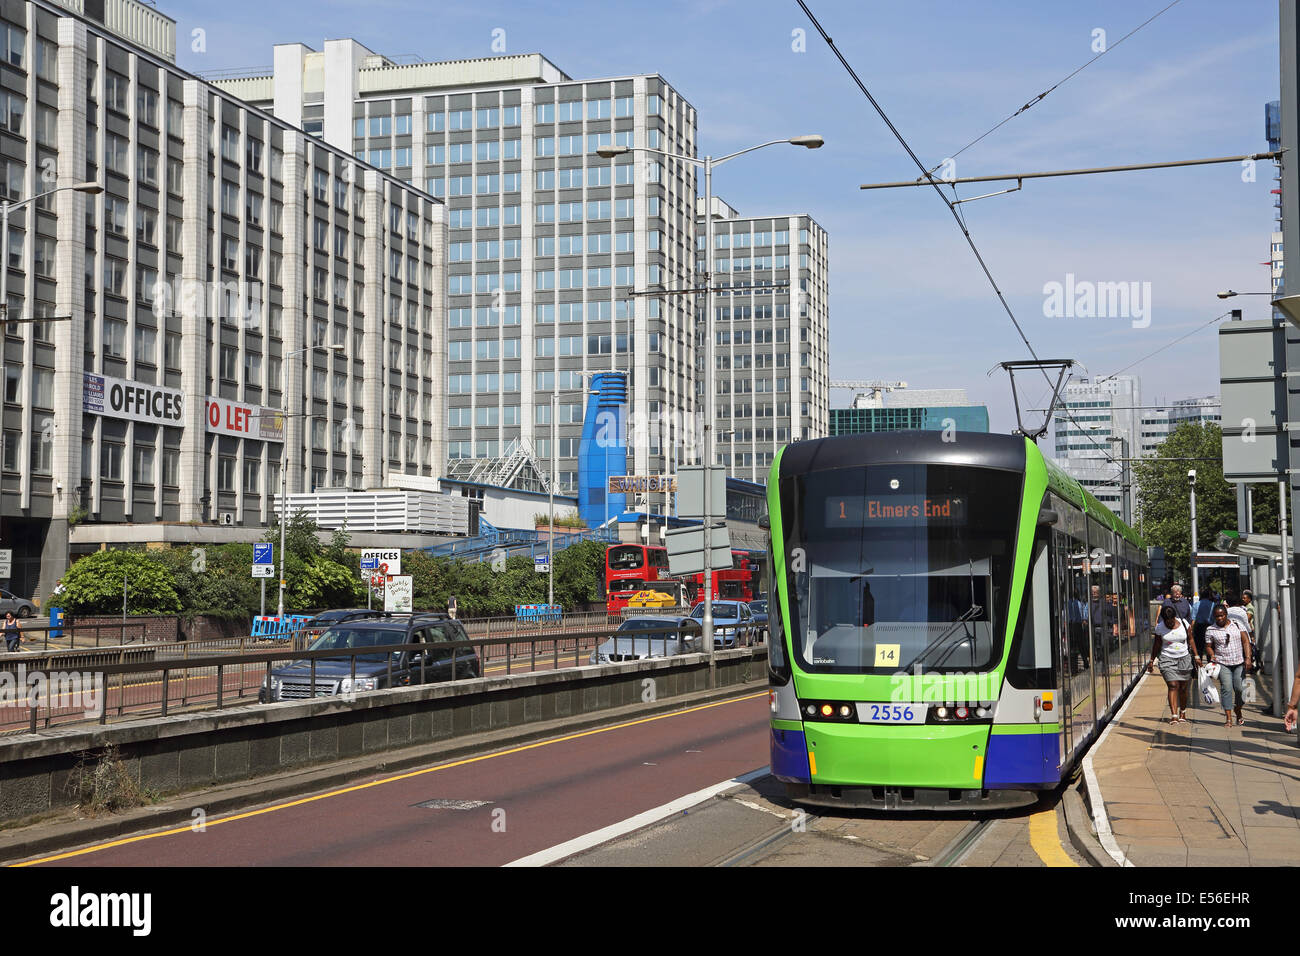 A Tram on the Croydon Tramlink system stops on Wellesley Road in Croydon town centre Stock Photo